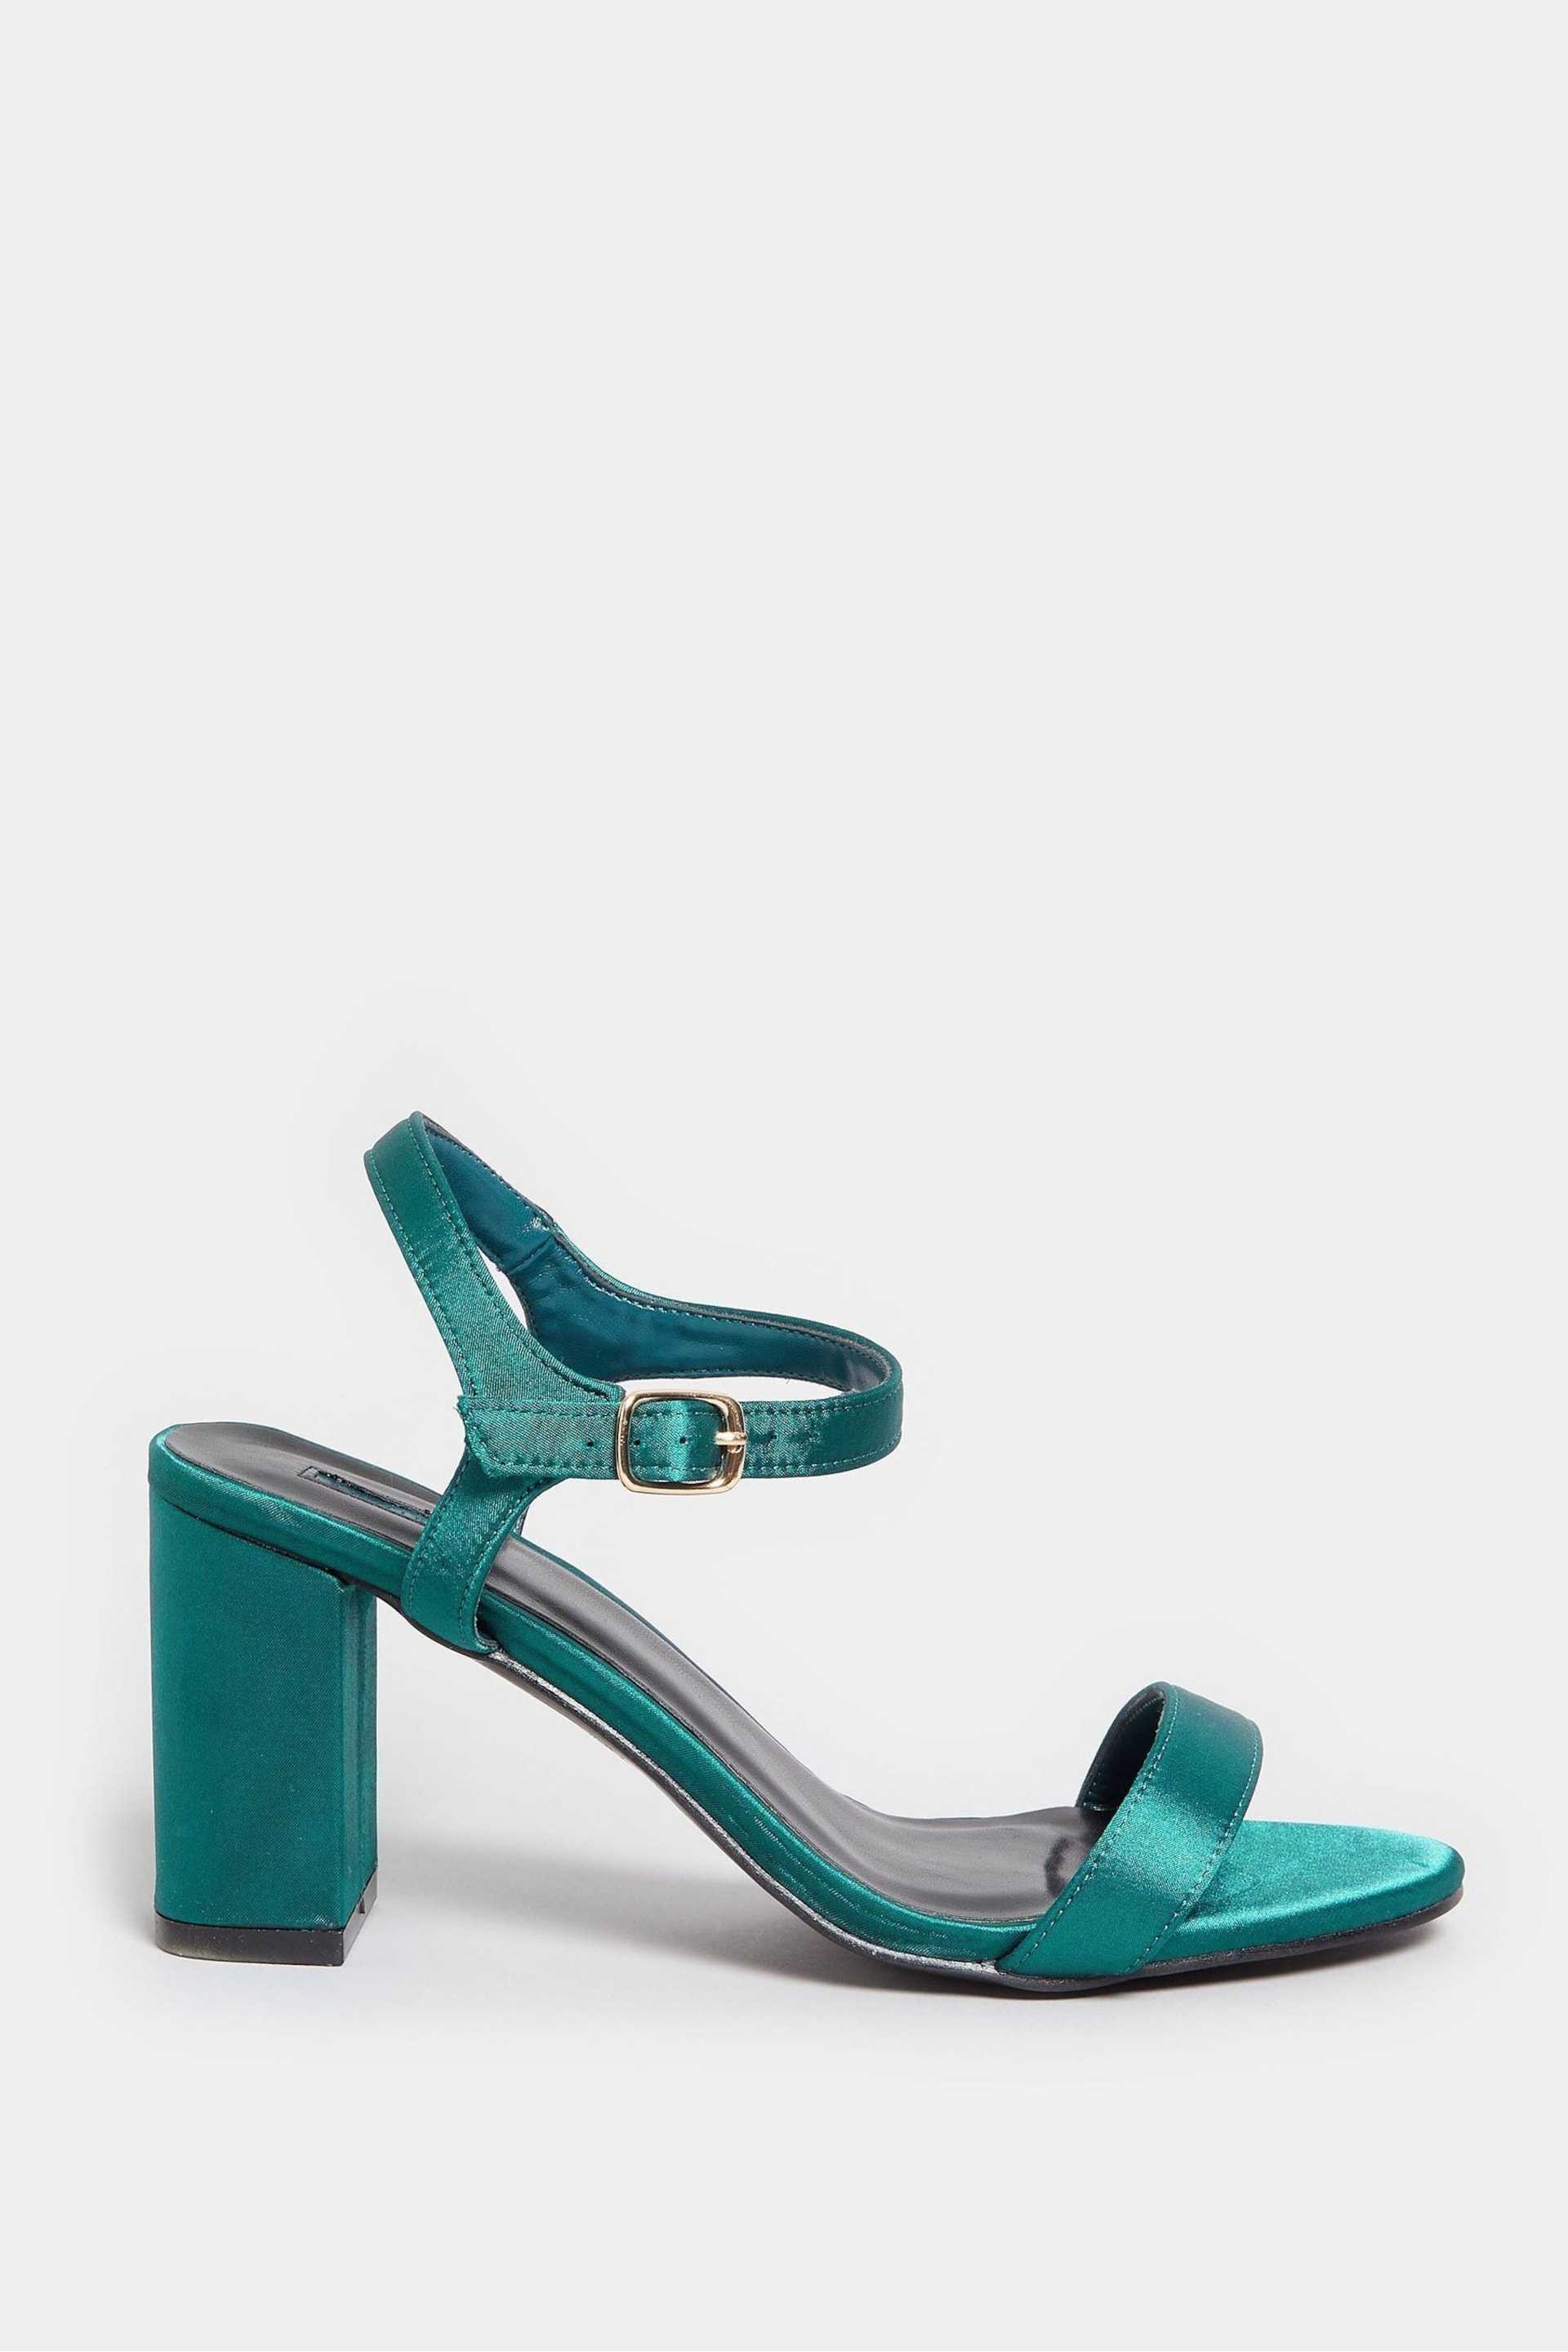 Yours Curve Green Extra-Wide Fit Block Heel Sandals - Image 1 of 3